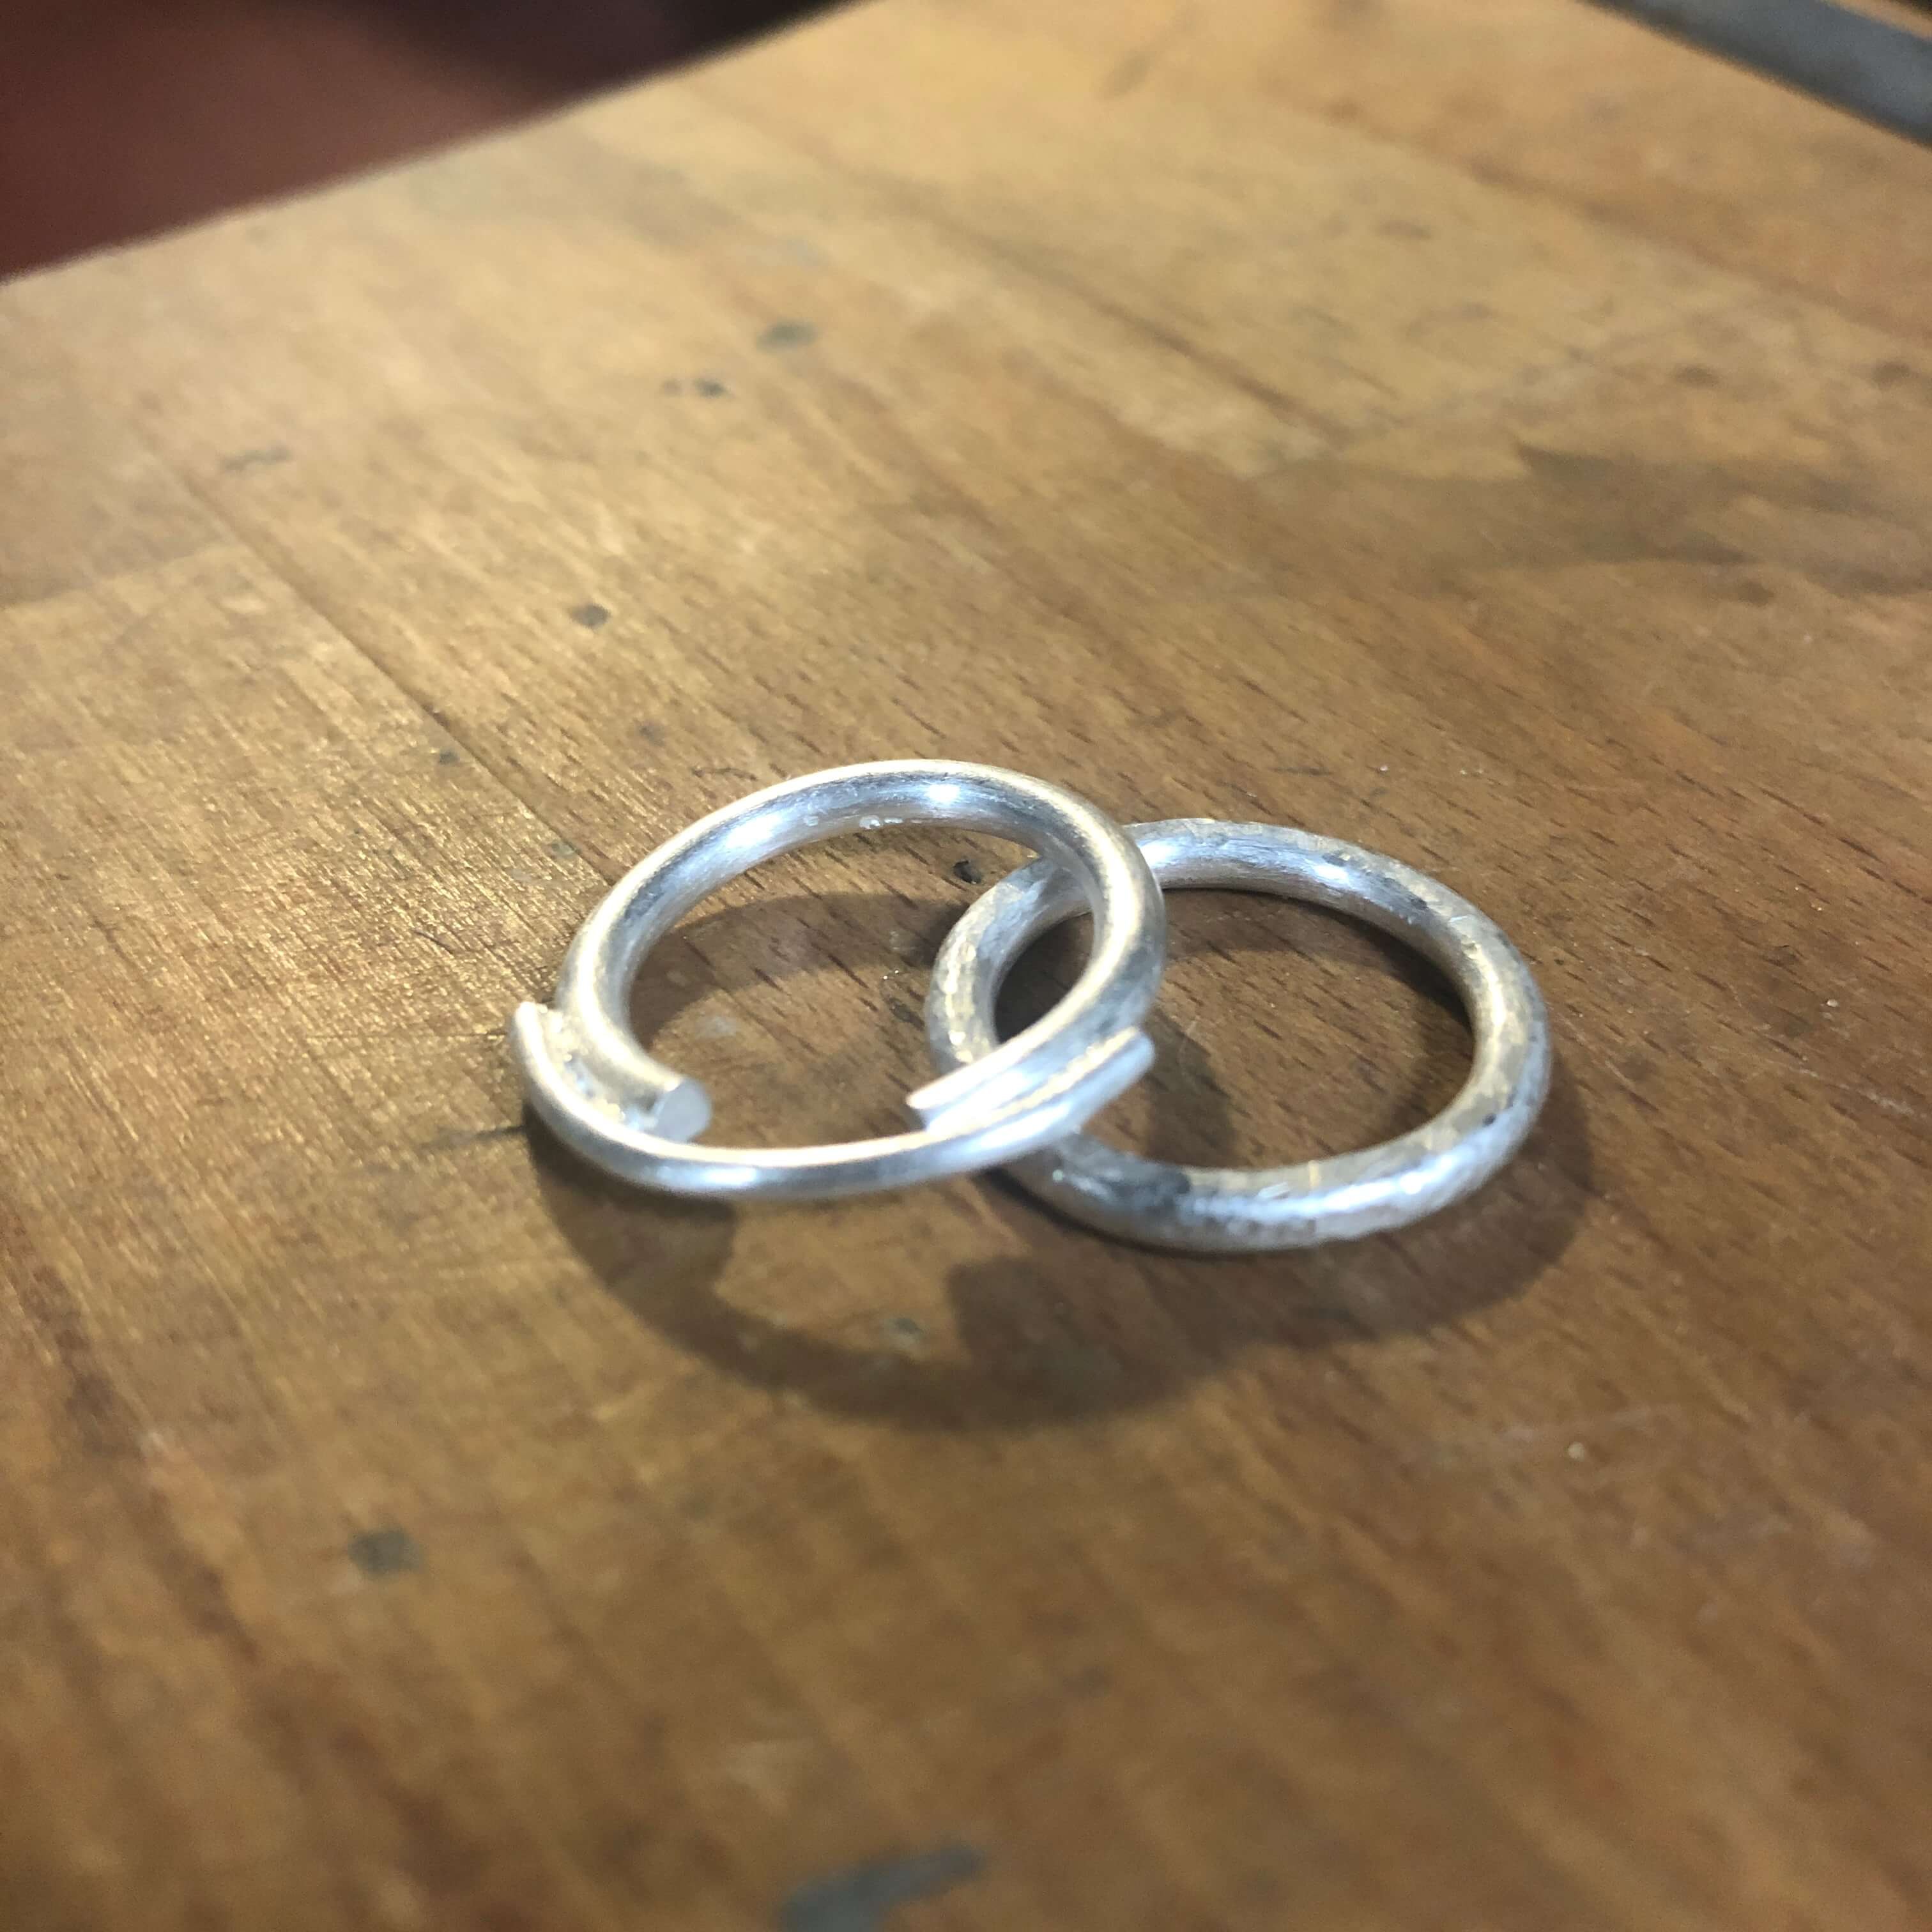 One-to-one Ring Making Workshop by Ange B Designs Jewellery